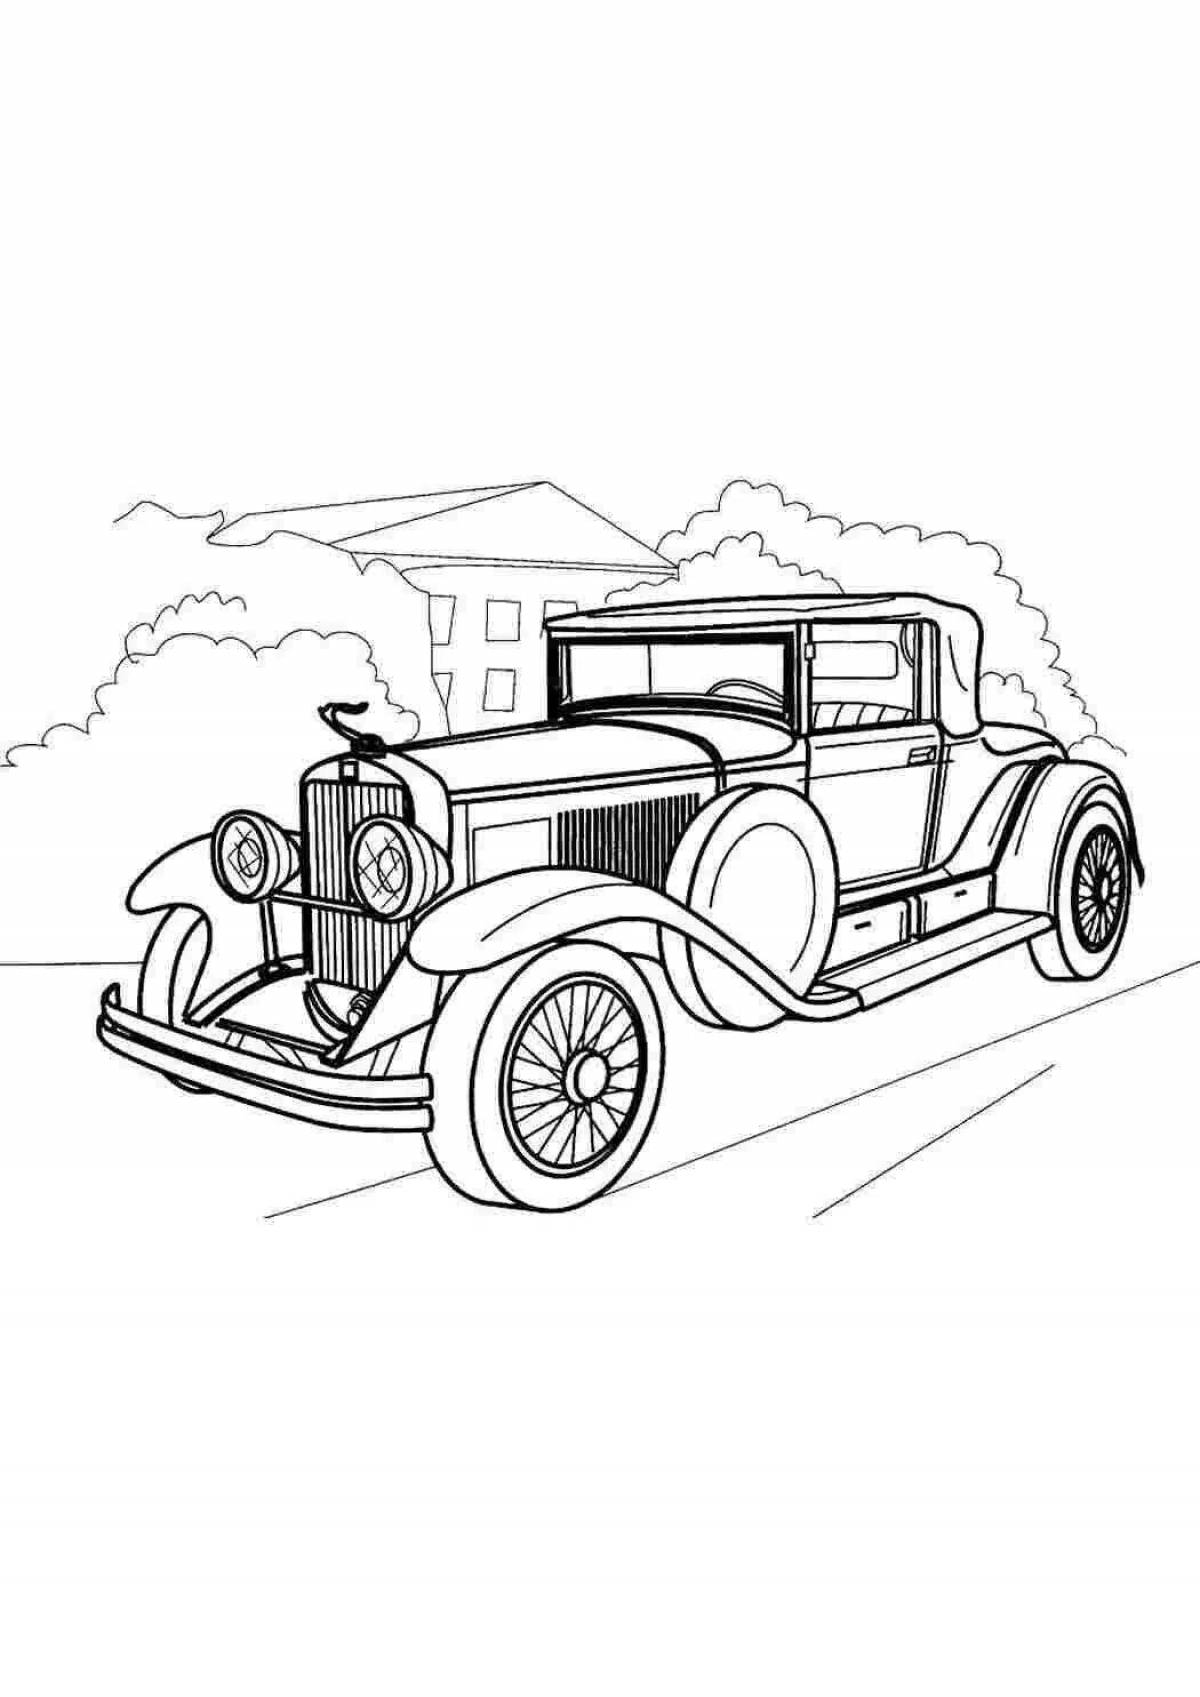 Fun retro cars coloring pages for boys